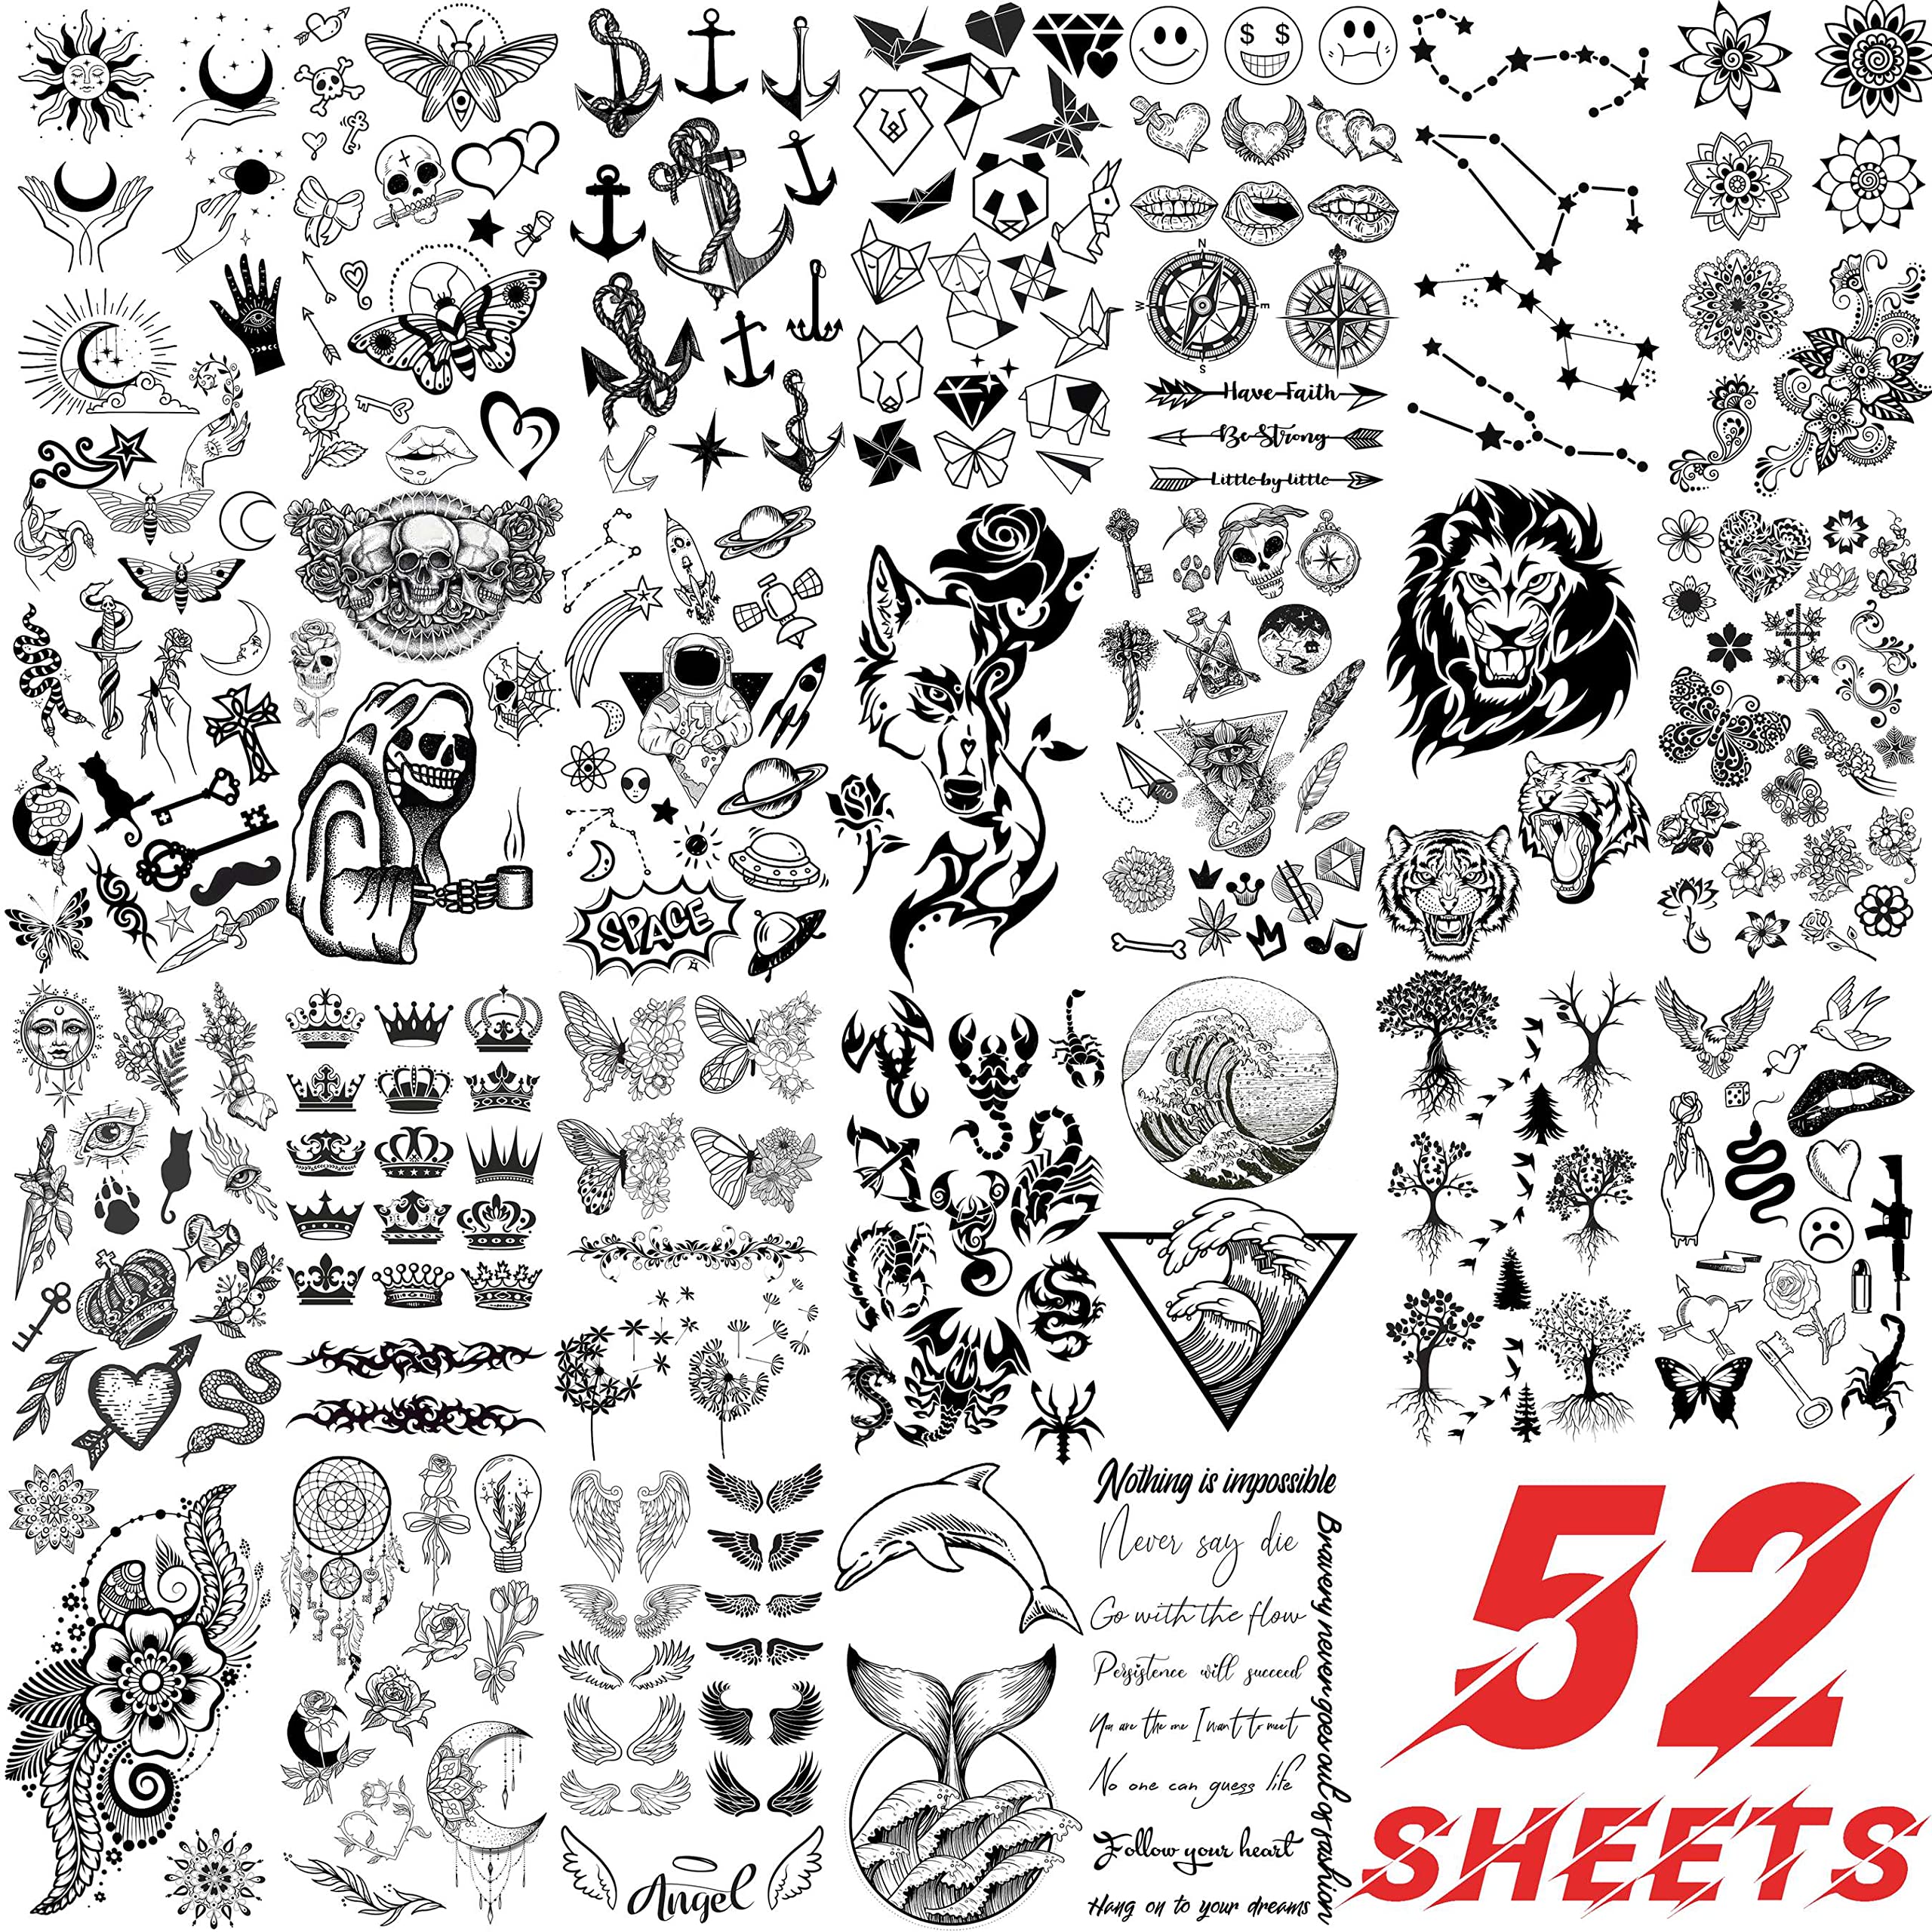 EGMBGM 52 Sheets Tiny Small Temporary Tattoos For Kids Boys Girls, Tribal Animals Butterfly Anchor Compass Tattoo Stickers For Men Women, 3D Cute Flower Fake Face Tatoo Kits Sets For Neck Arm Hands